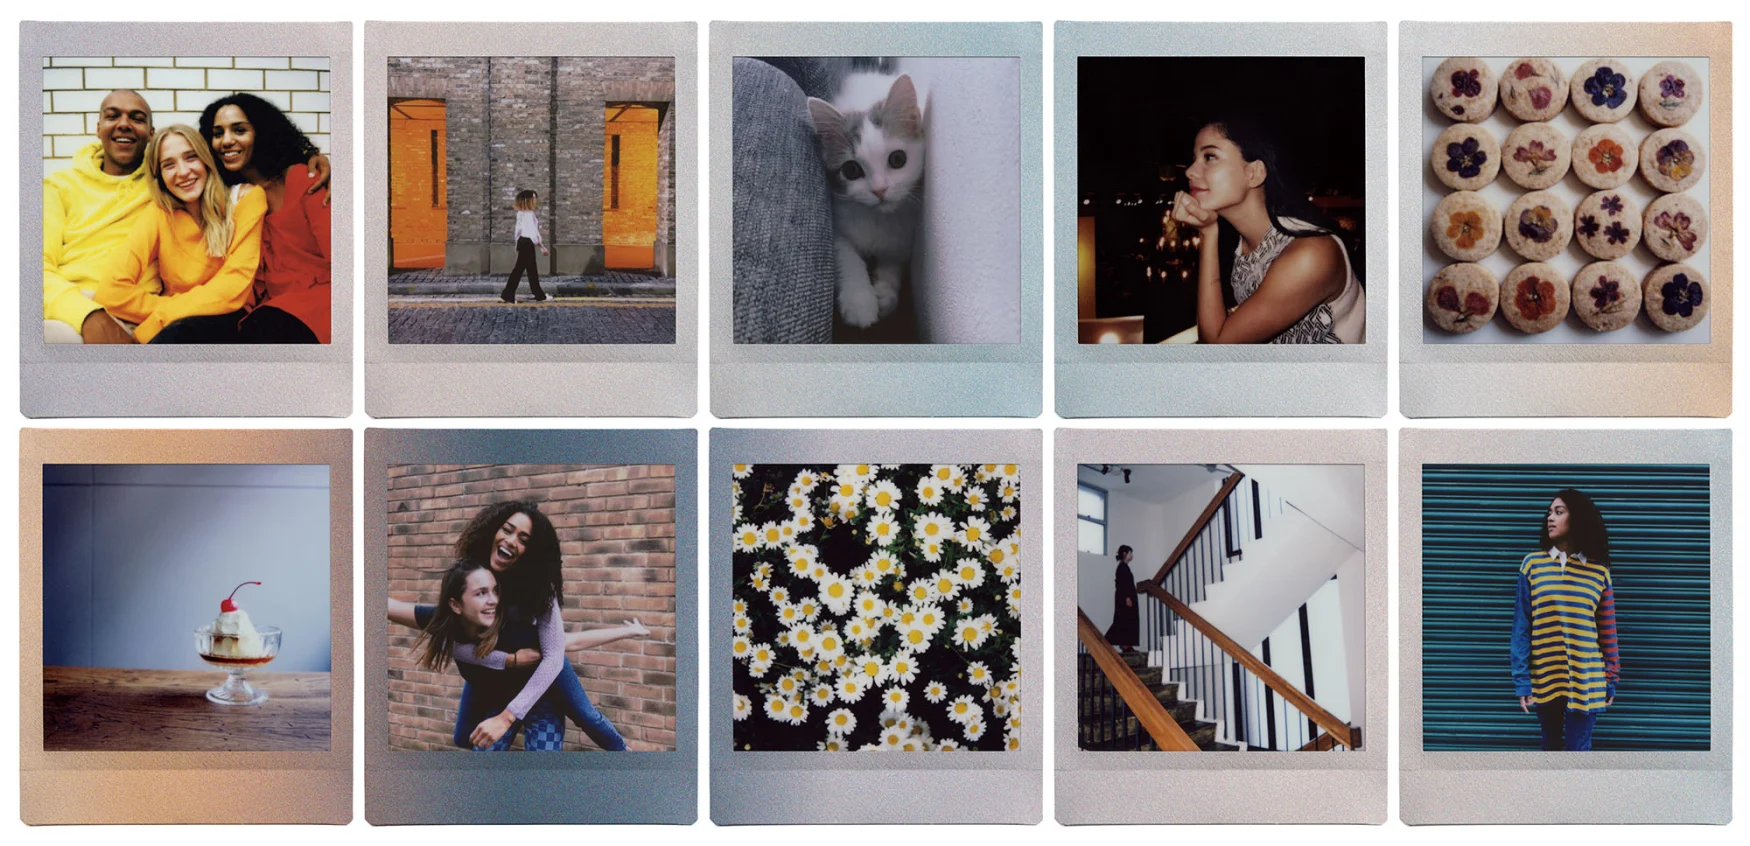 Fujfilm's Instax SQ40 marries retro charm with larger square film